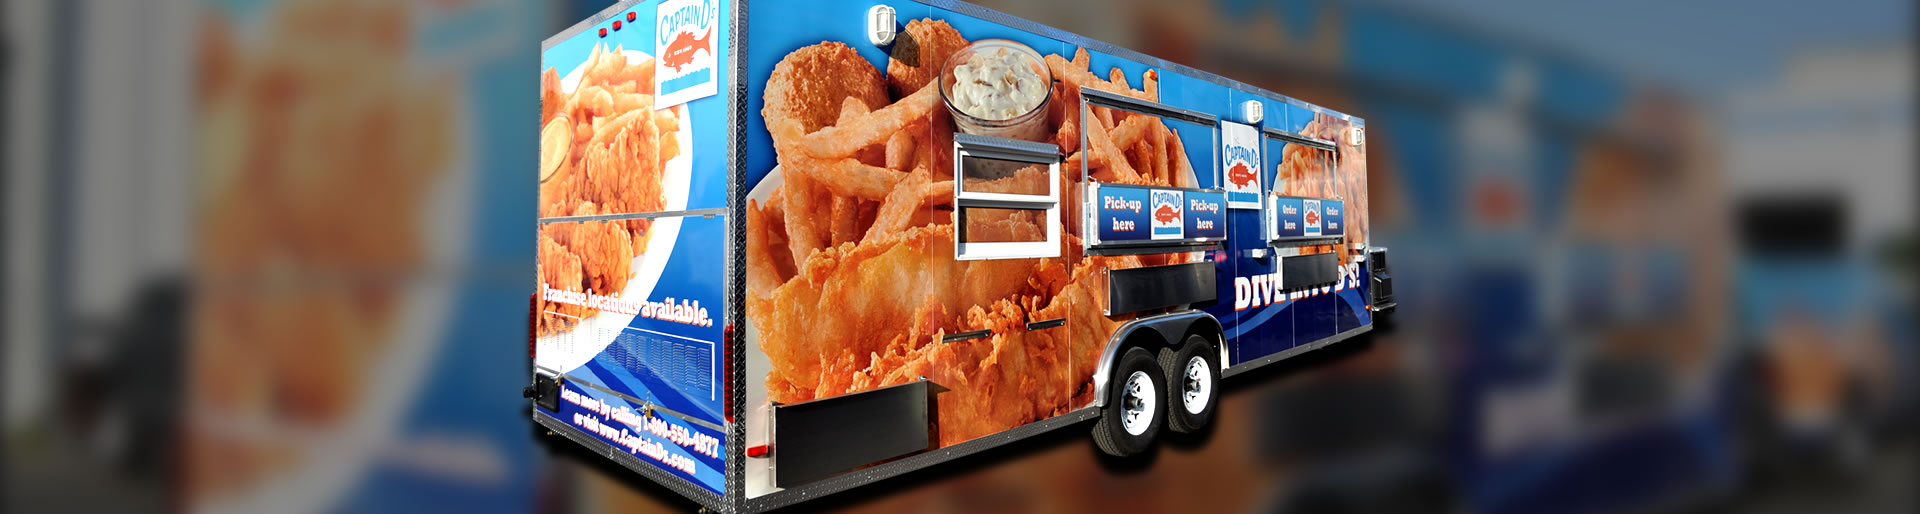 Food Trailer Manufacturers | Food Truck Makers | Concession Nation